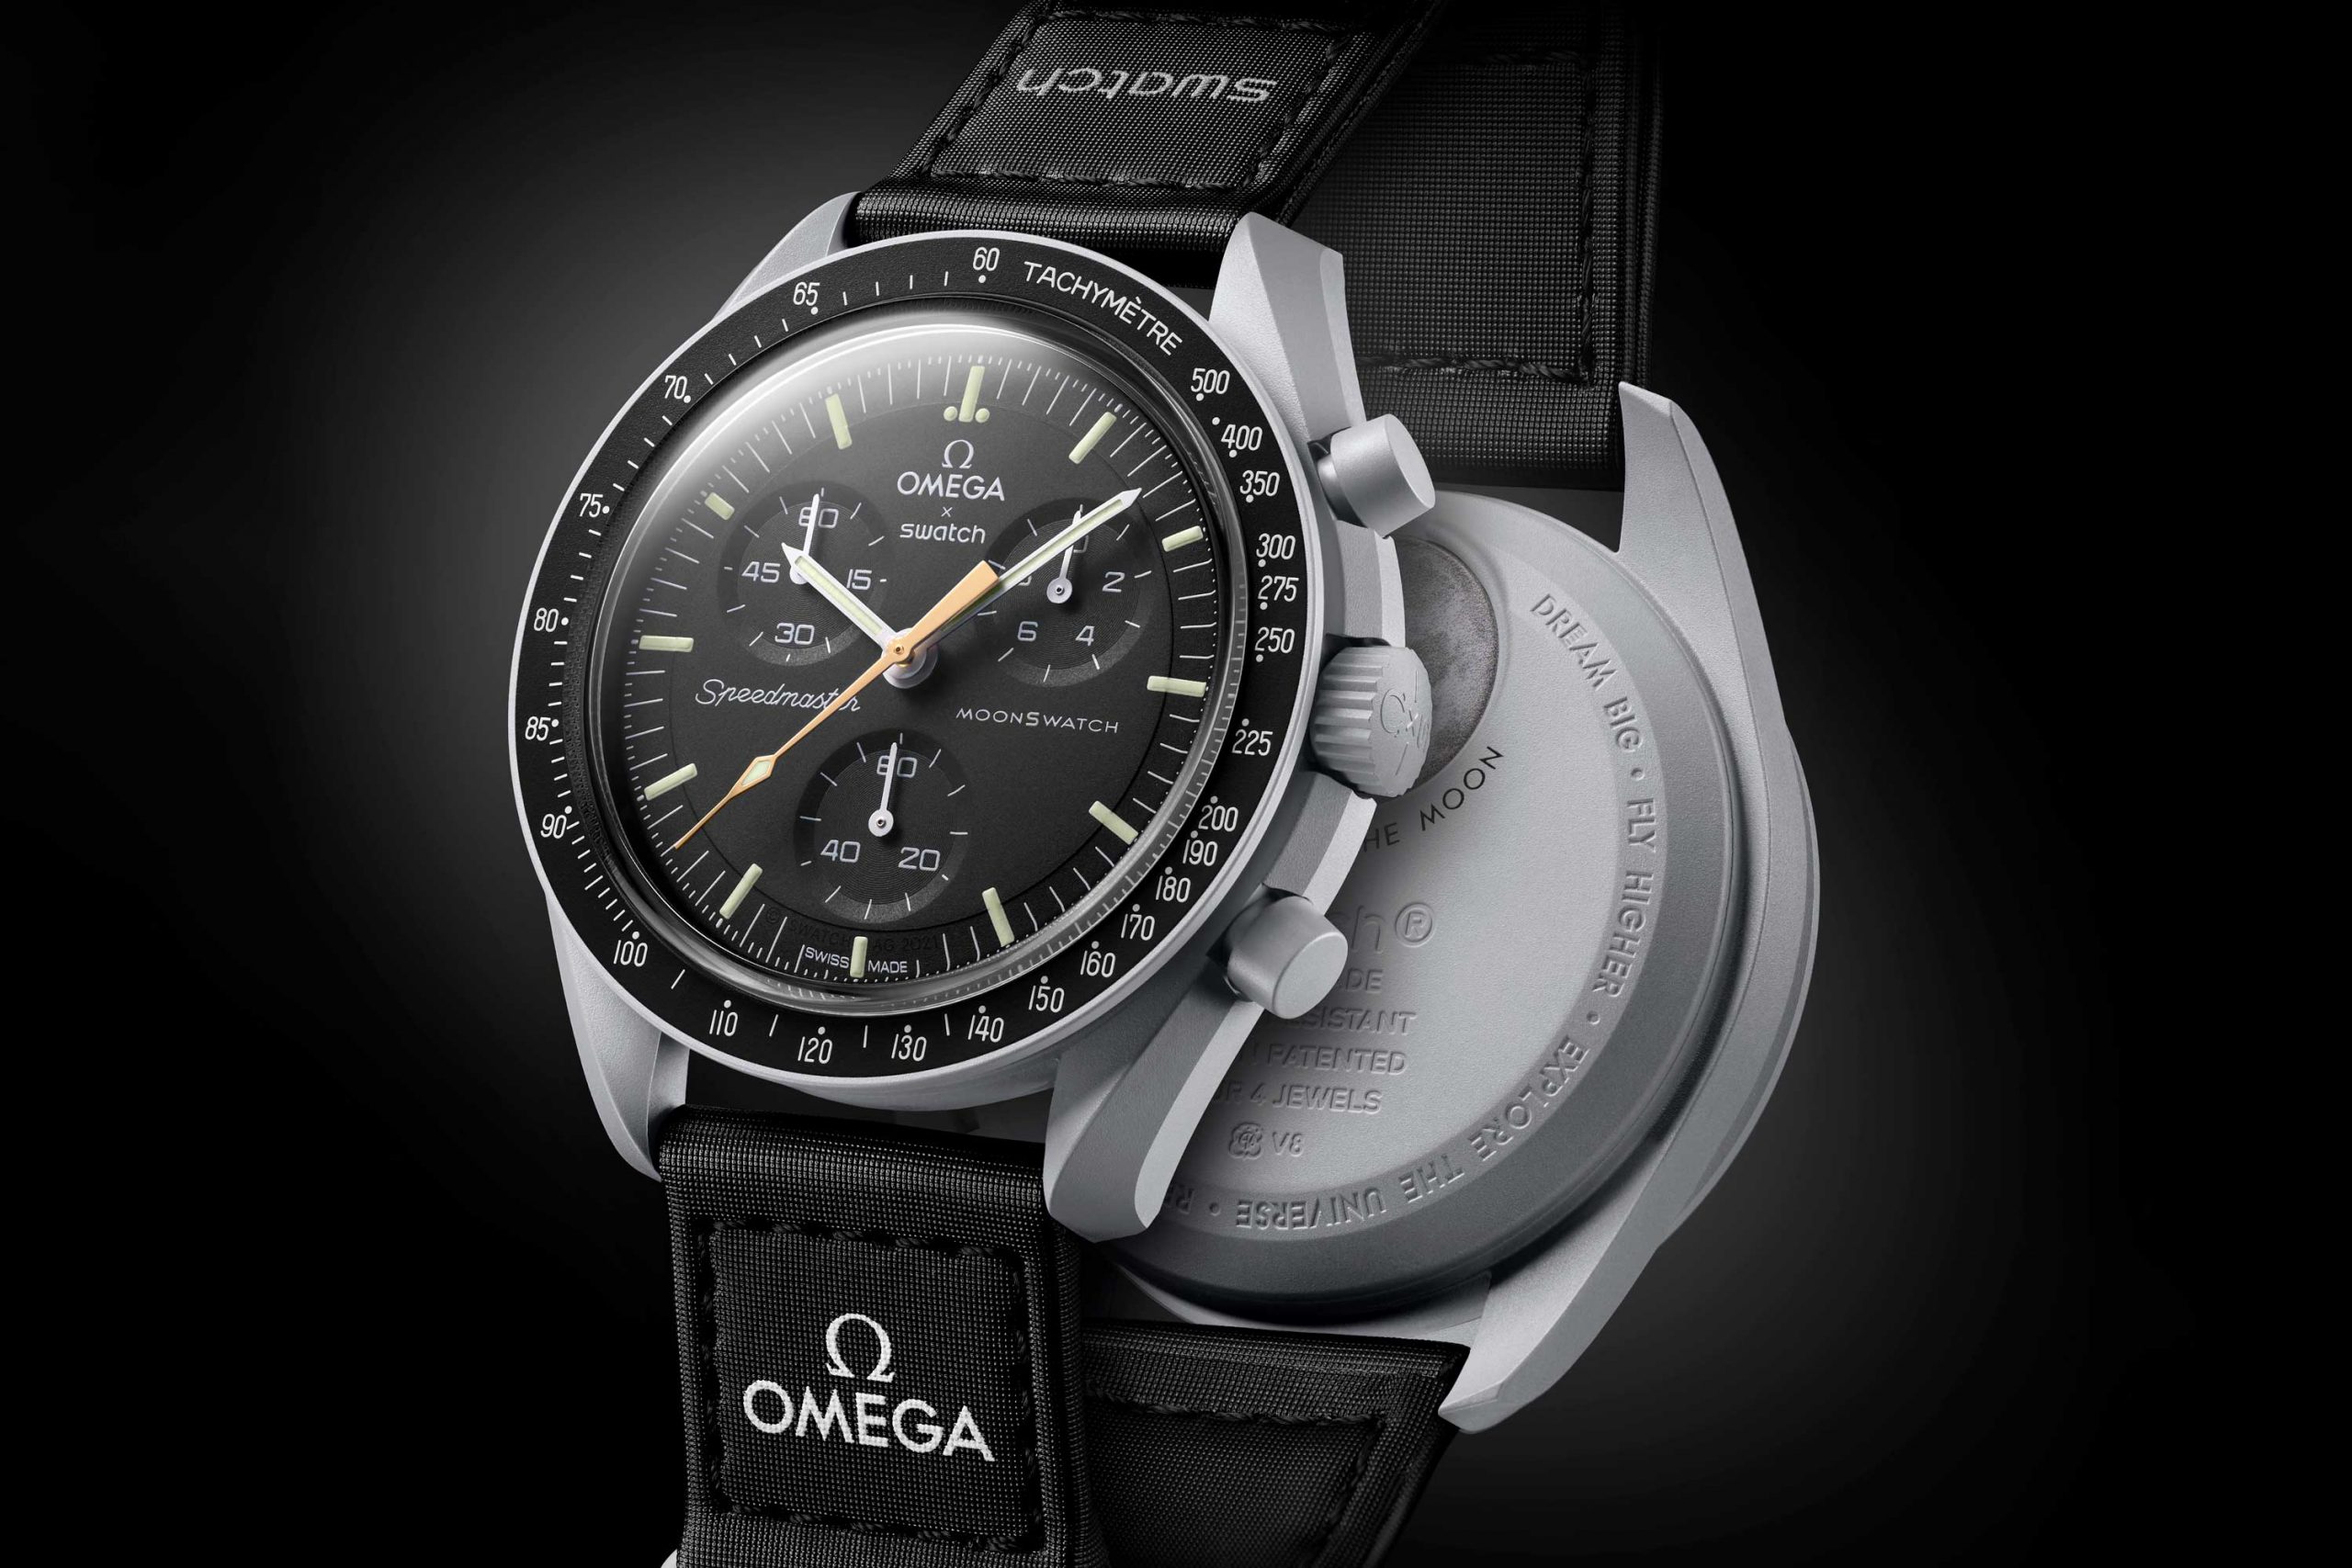 Introducing the Omega X Swatch MoonSwatch Mission to the Moon